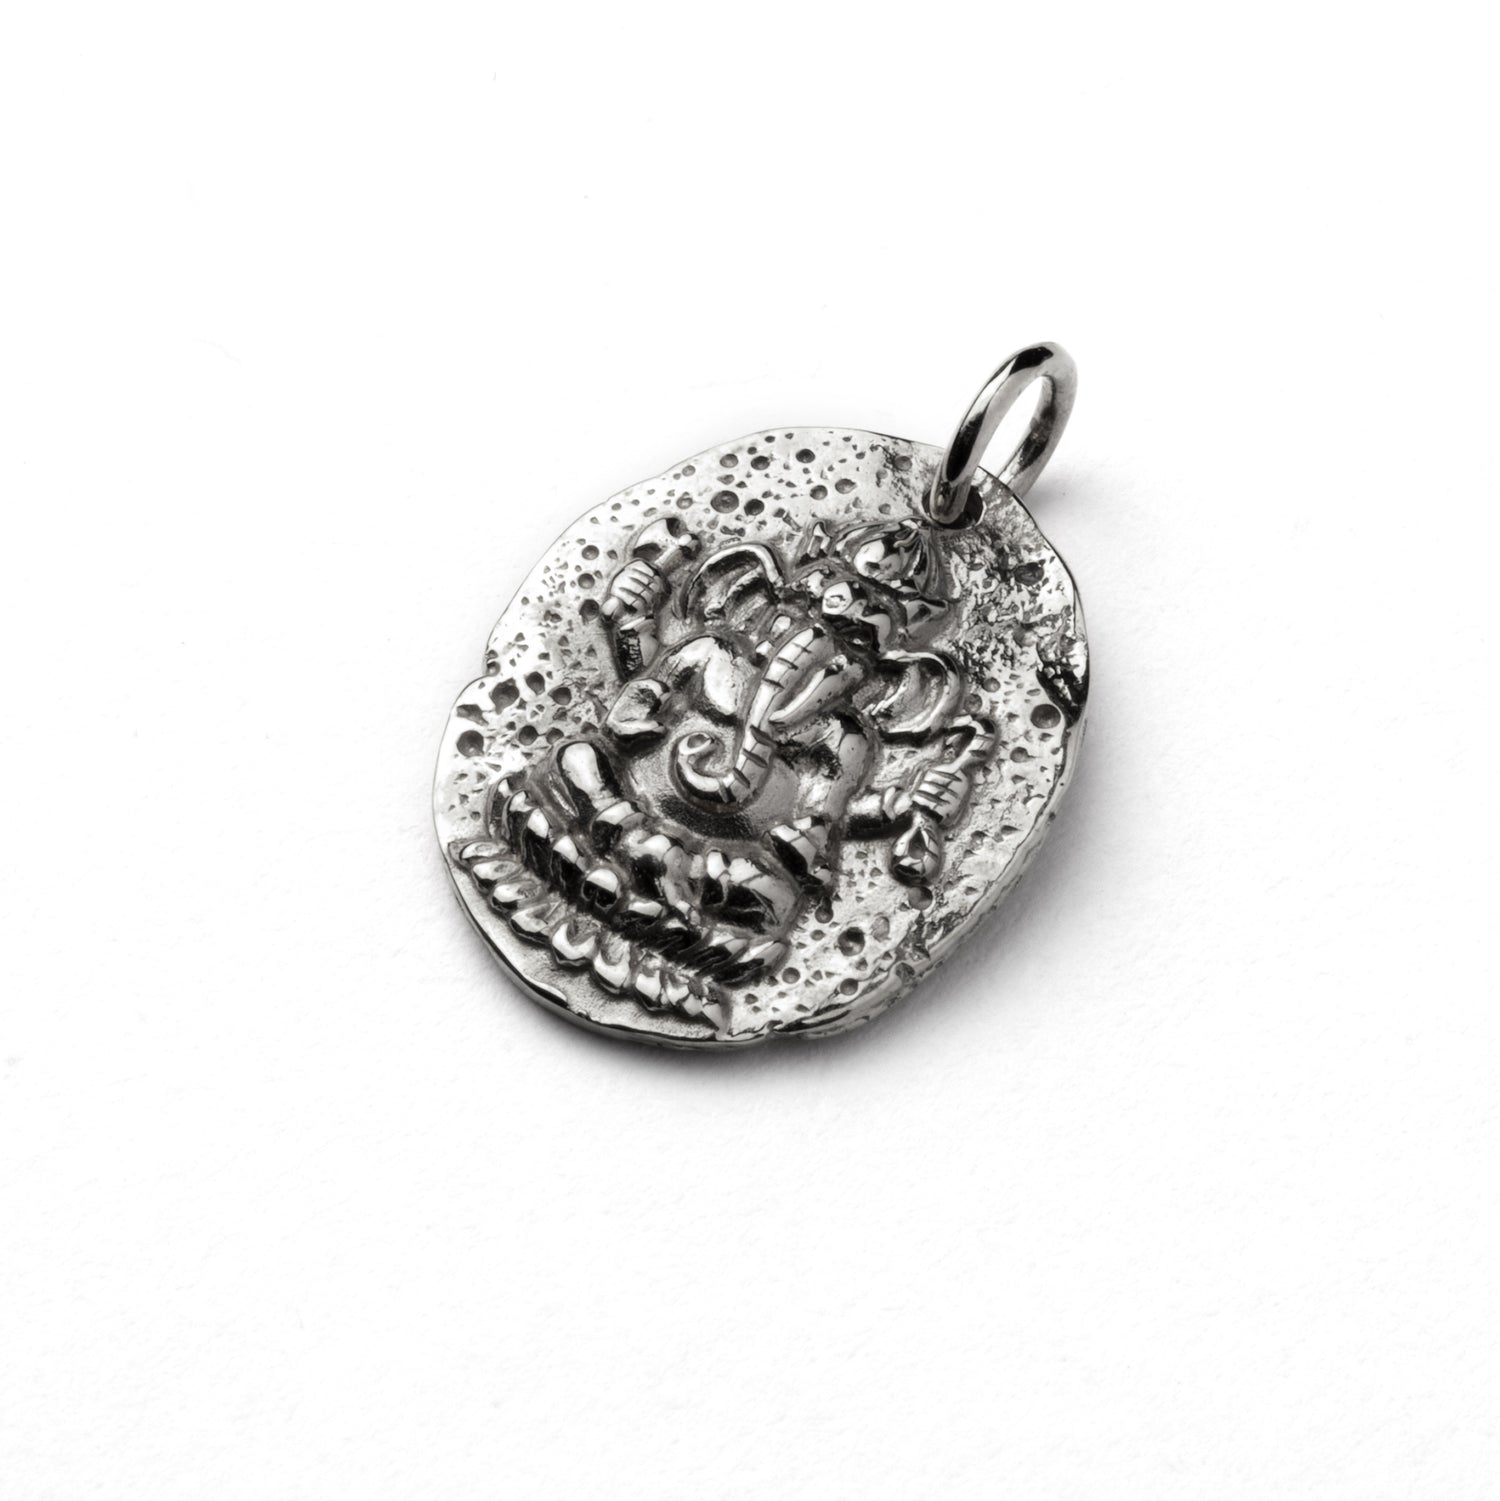 Ganesh Silver Coin Necklace right side view